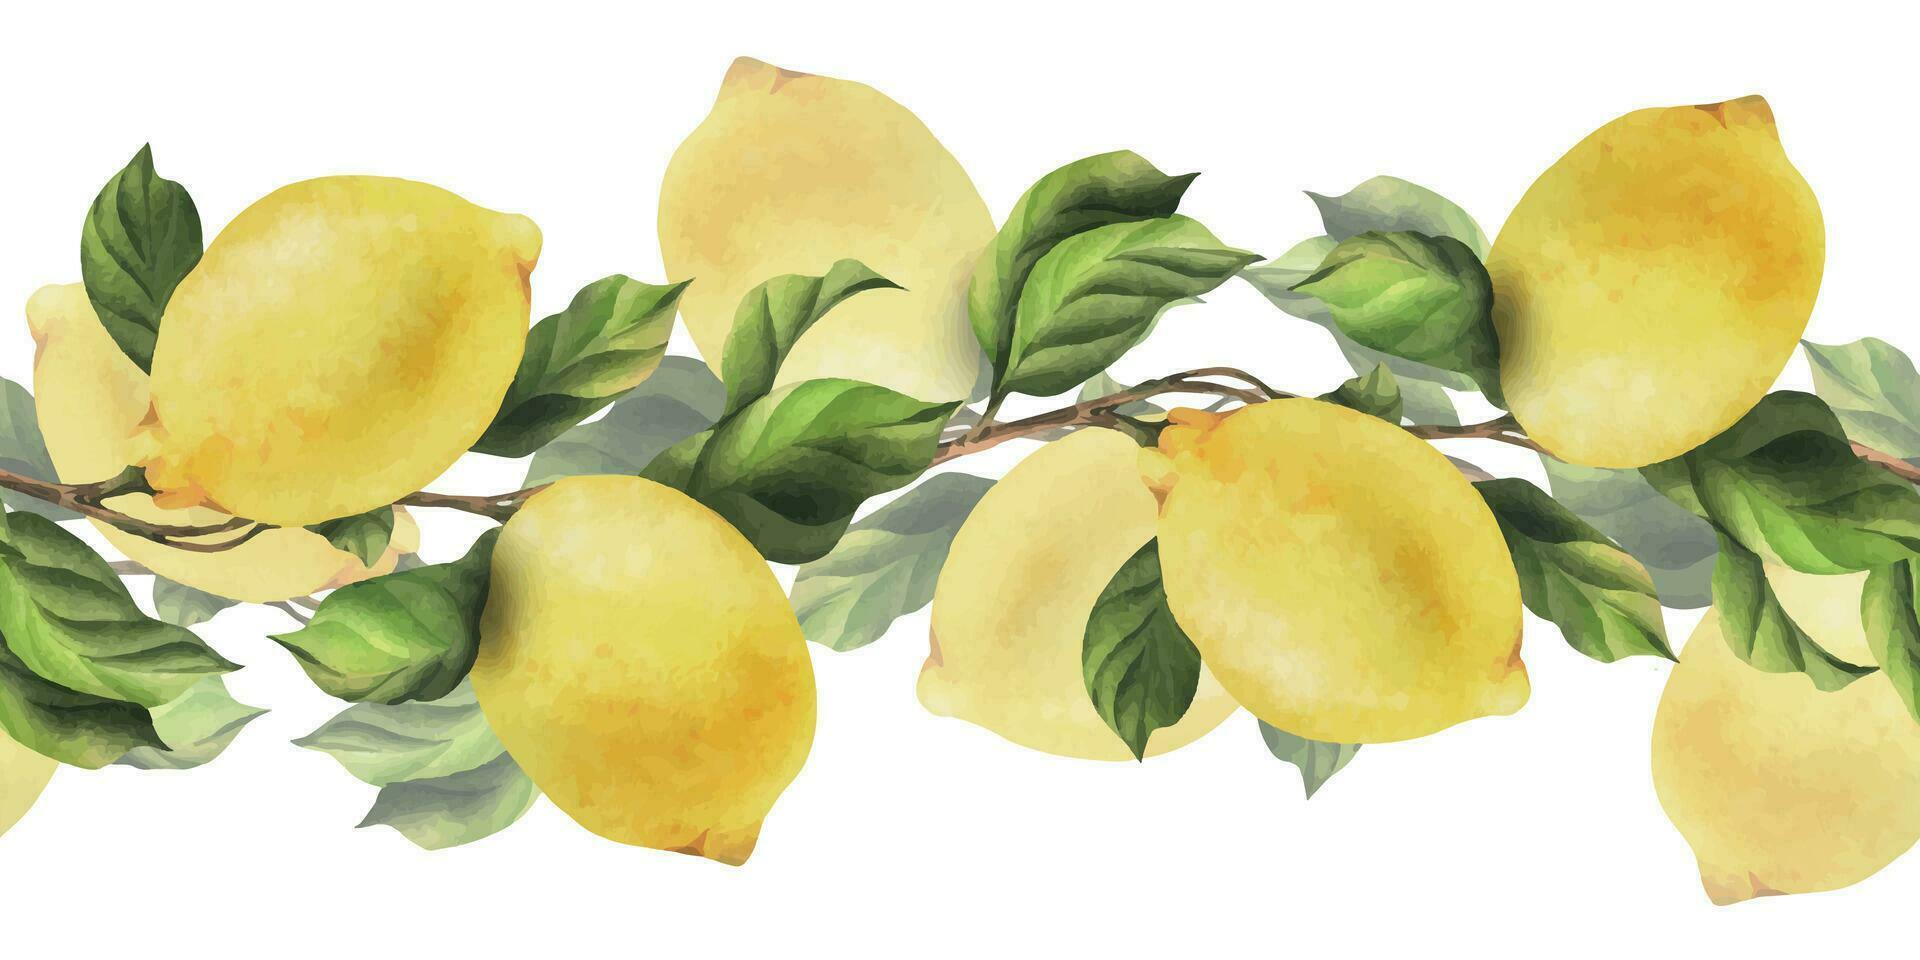 Lemons are yellow, juicy, ripe with green leaves, flower buds on the branches, whole. Watercolor, hand drawn botanical illustration. Seamless border on a white background vector